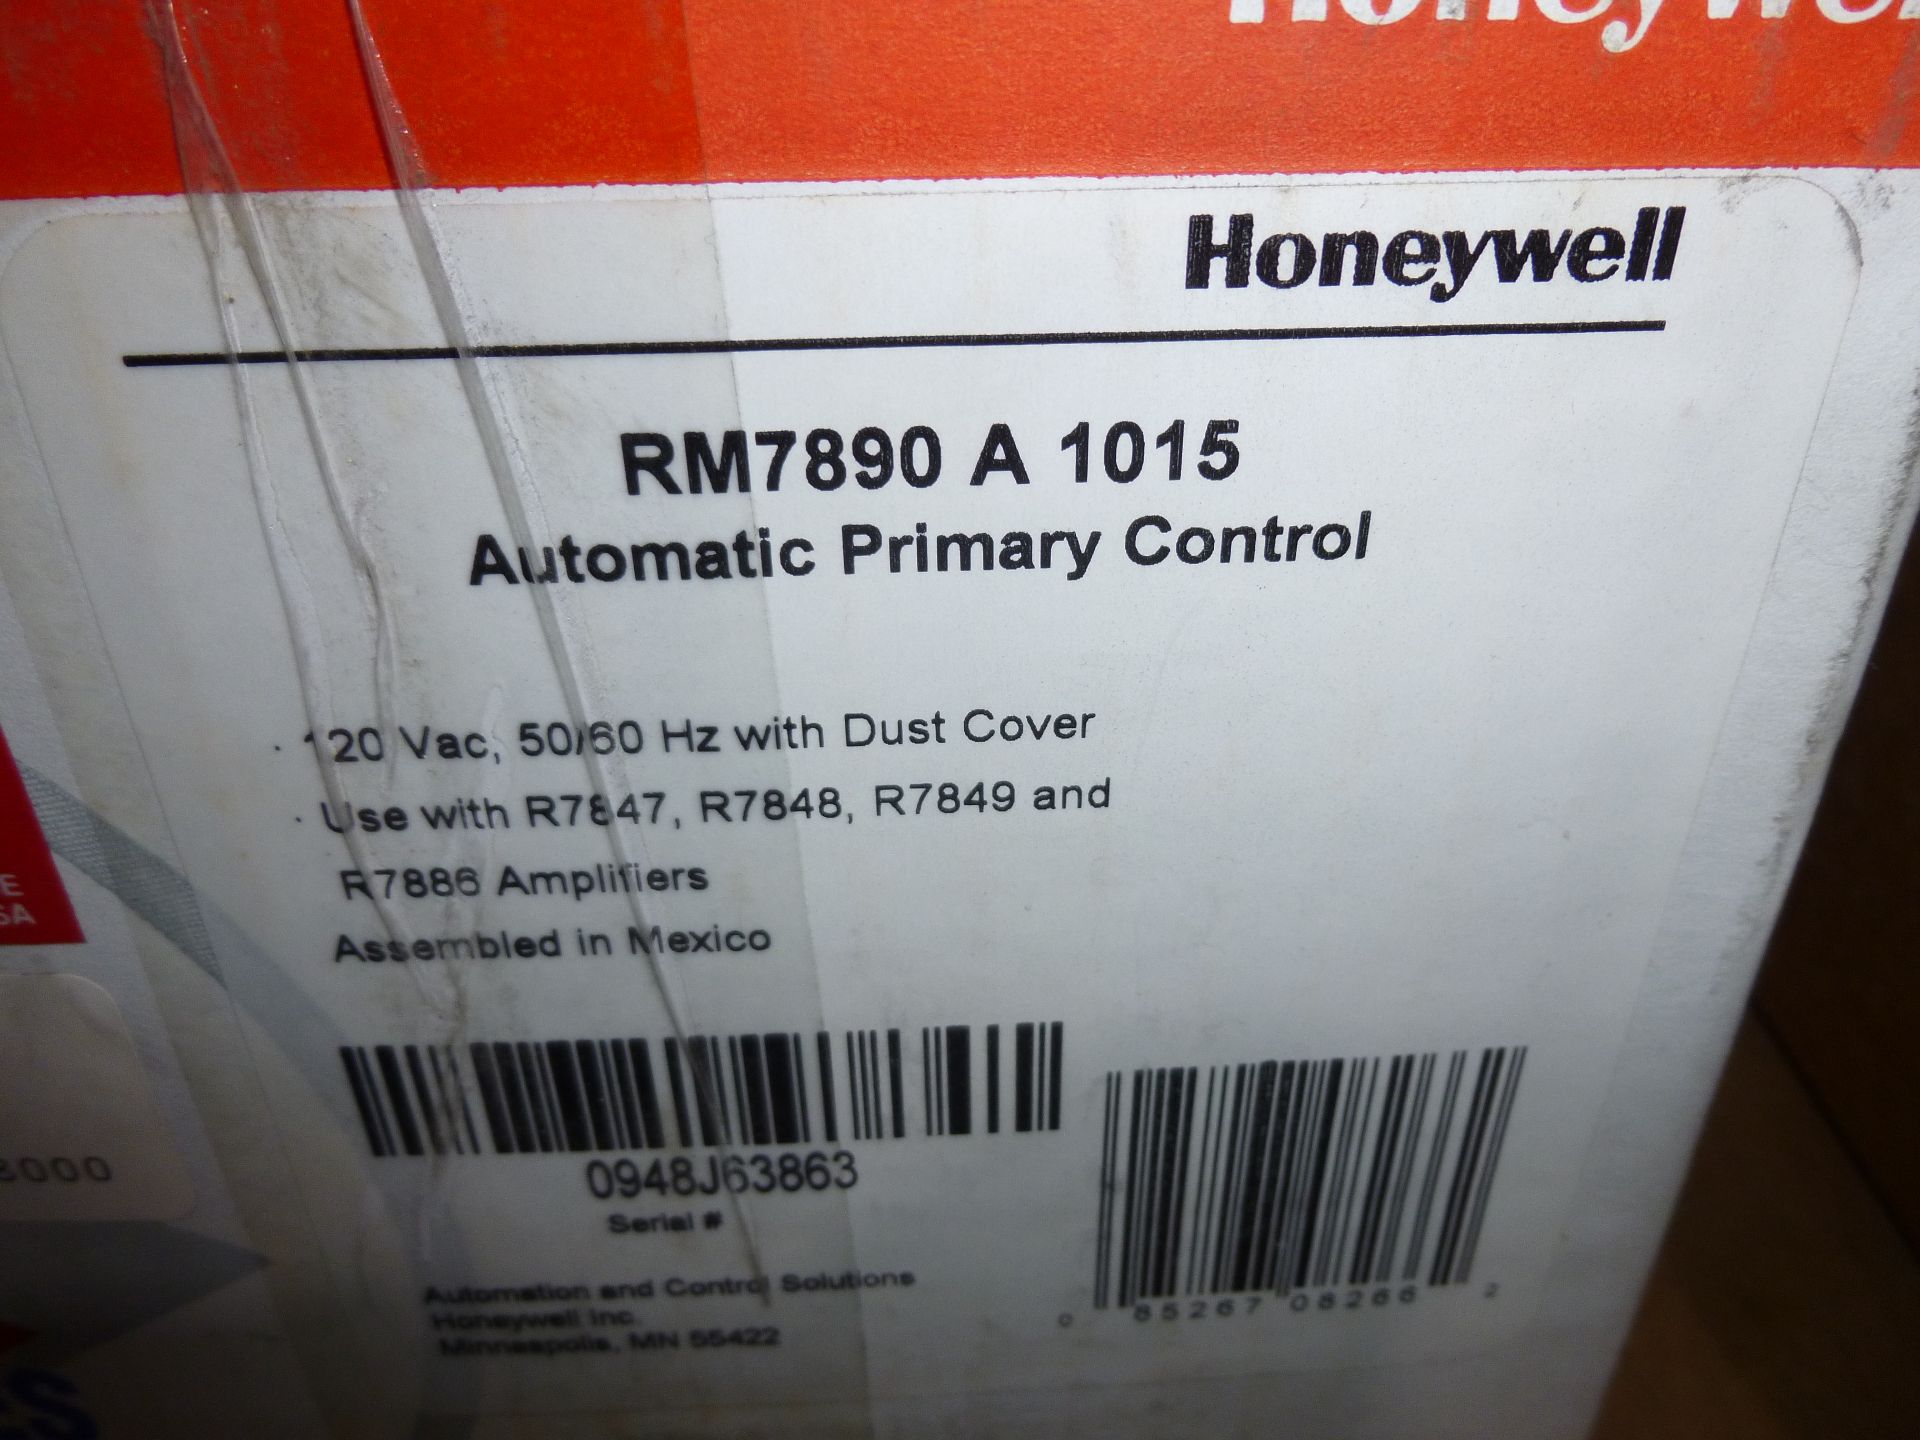 Honeywell RM7890-A-1015 automatic Primary Control, new in box, as always with Brolyn LLC auctions, - Image 2 of 2